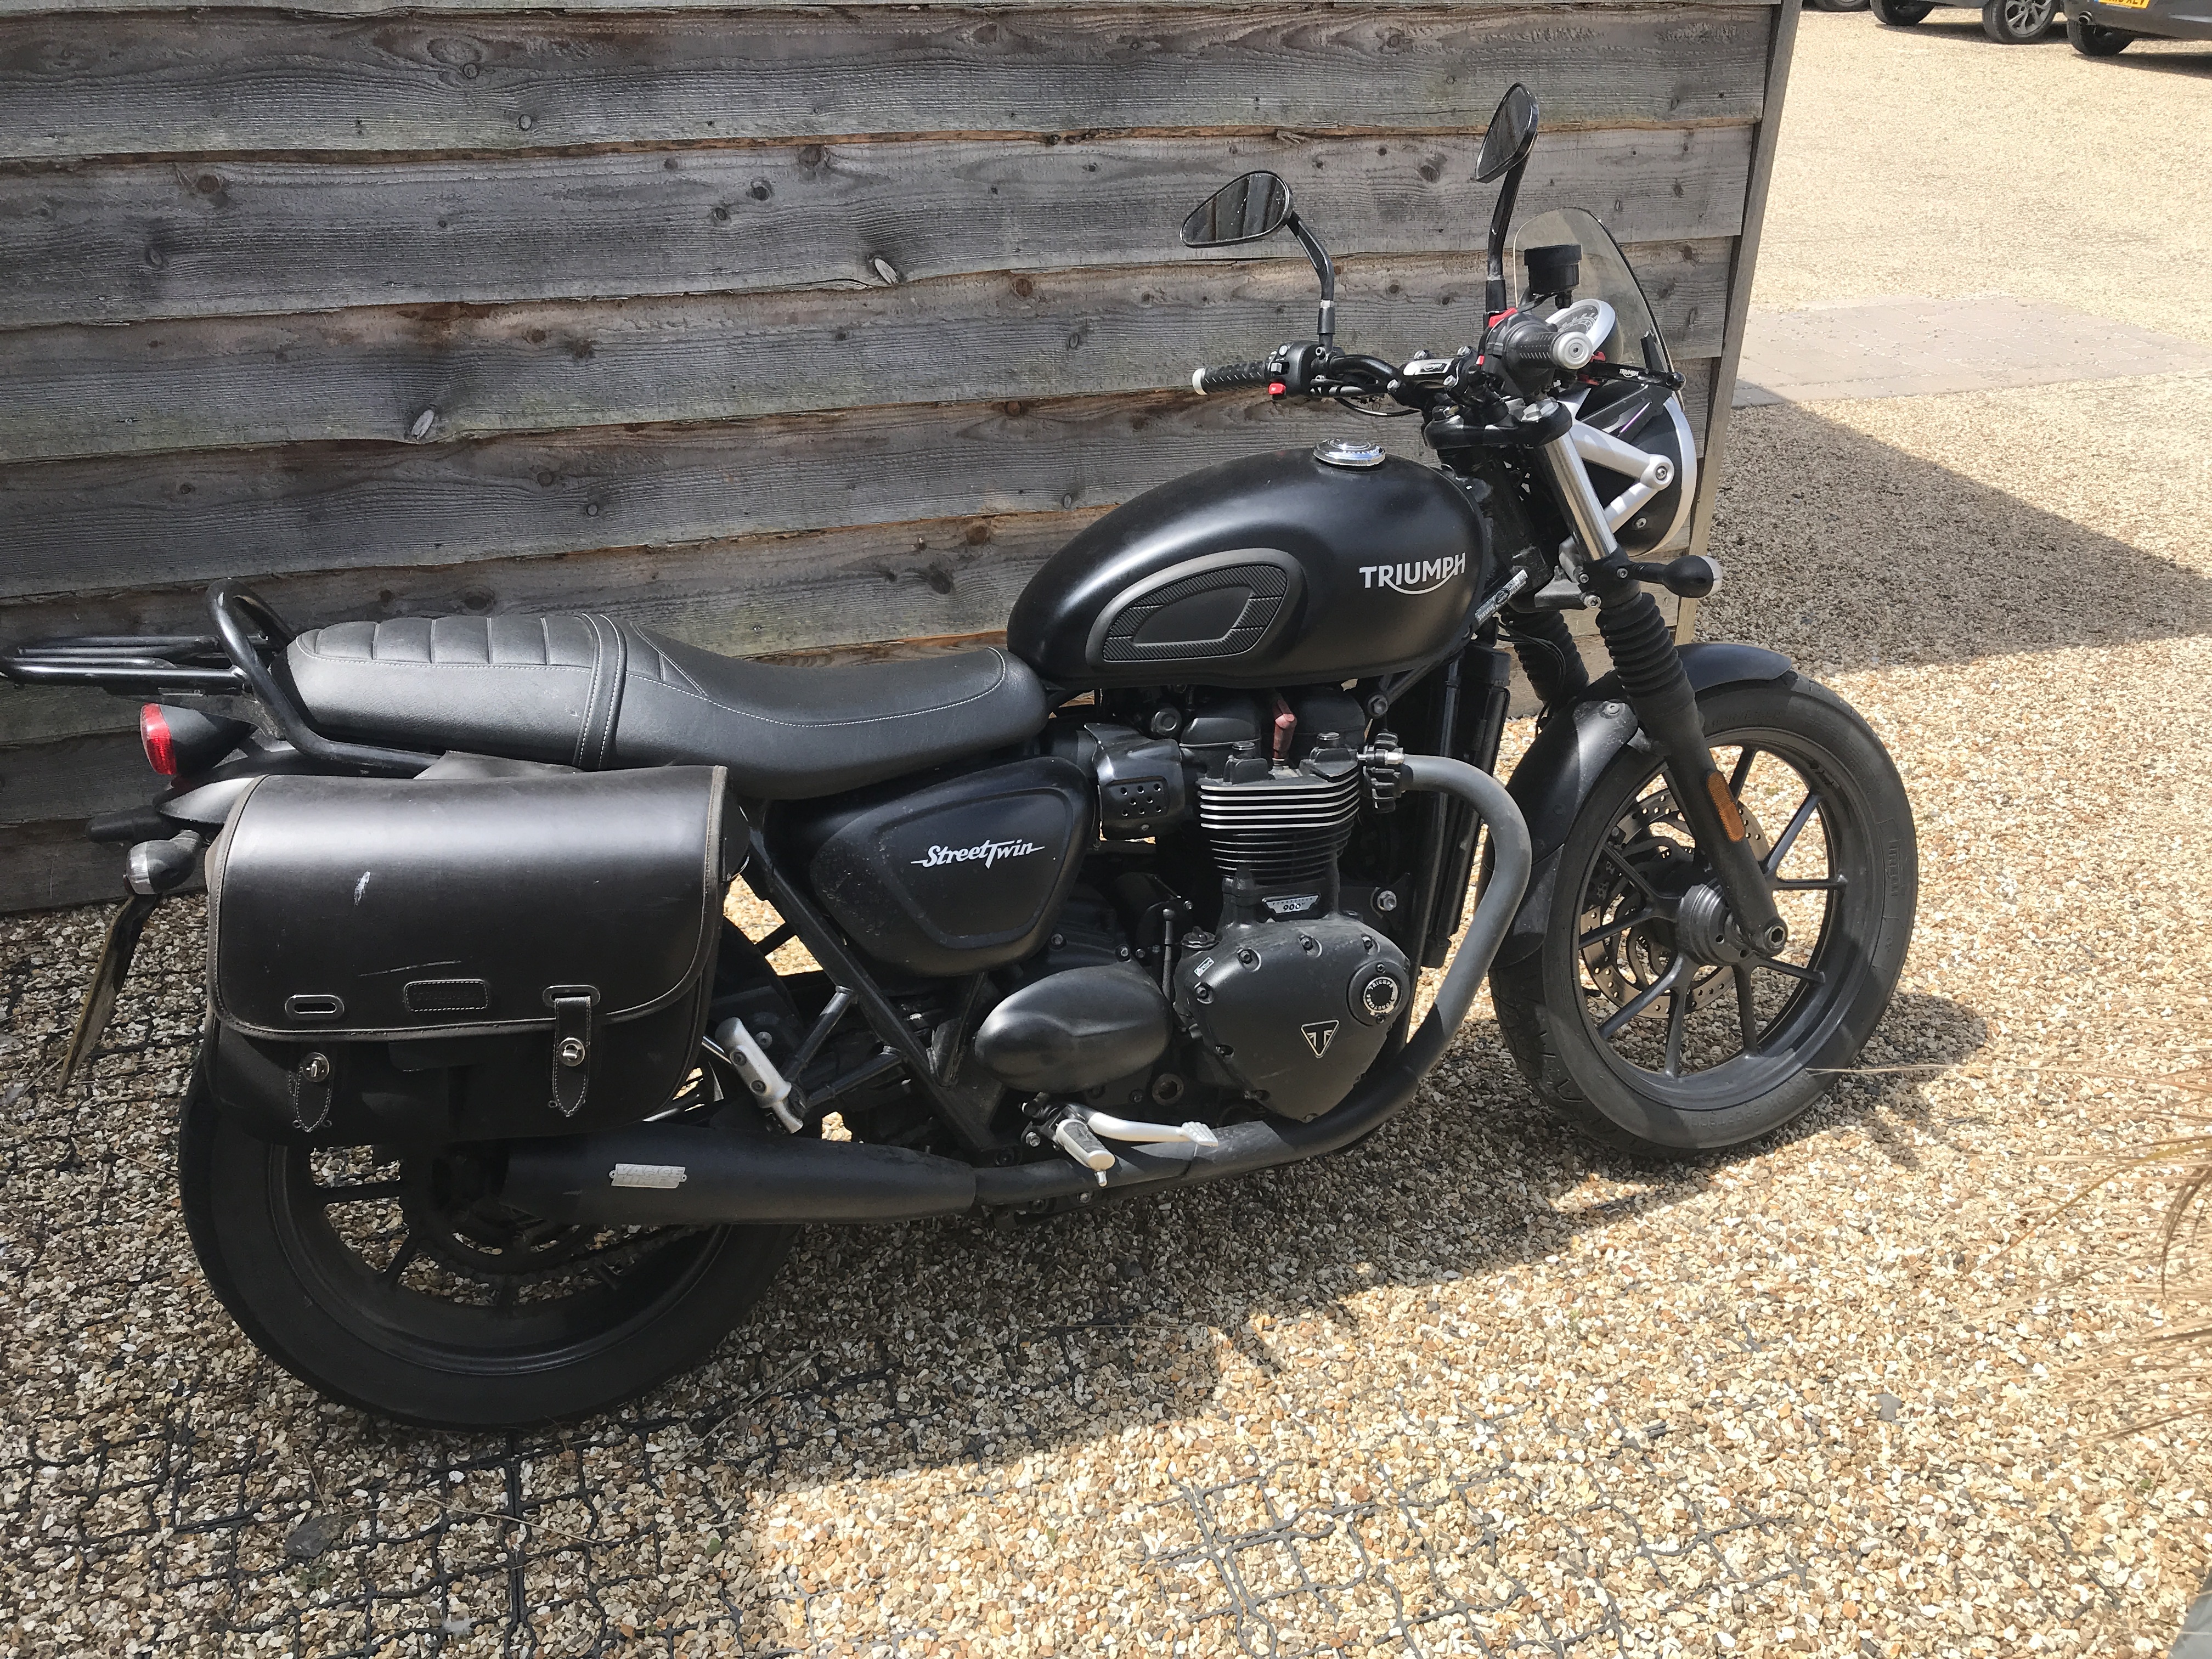 New Street Twin Rider From Brizzle | The Triumph Forum